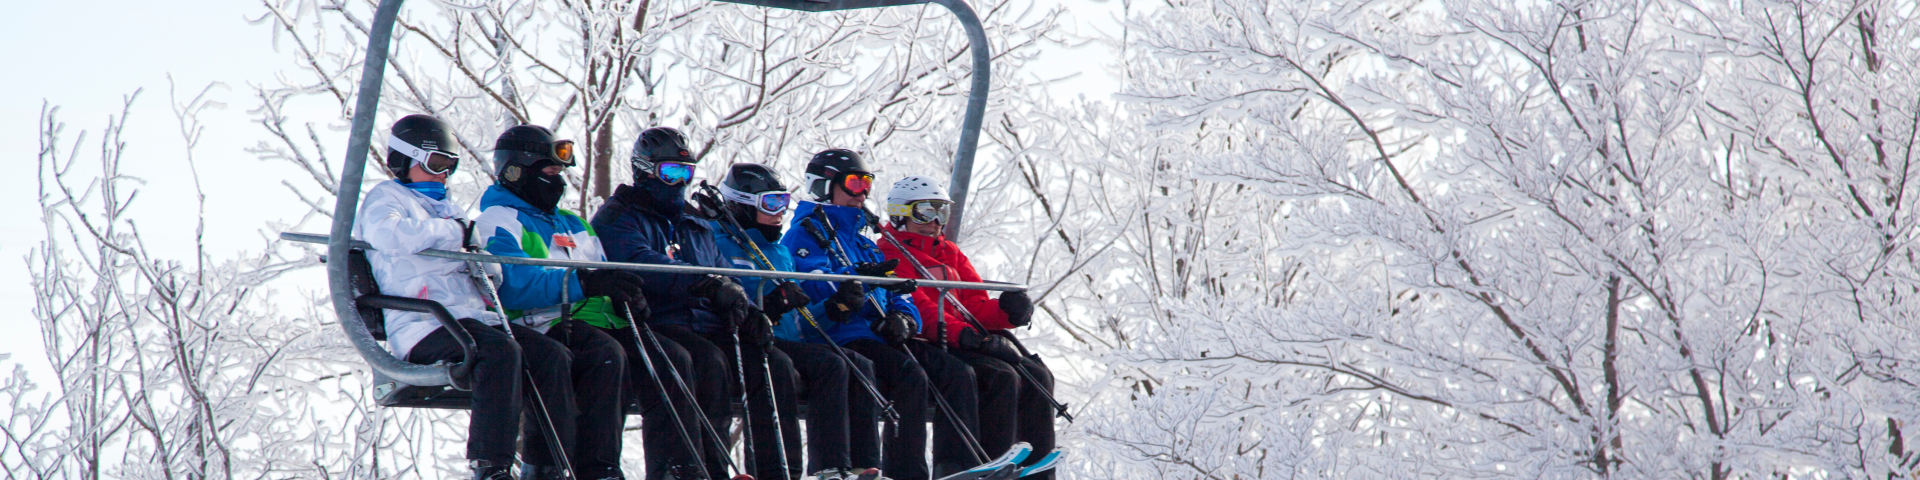 People on chairlift